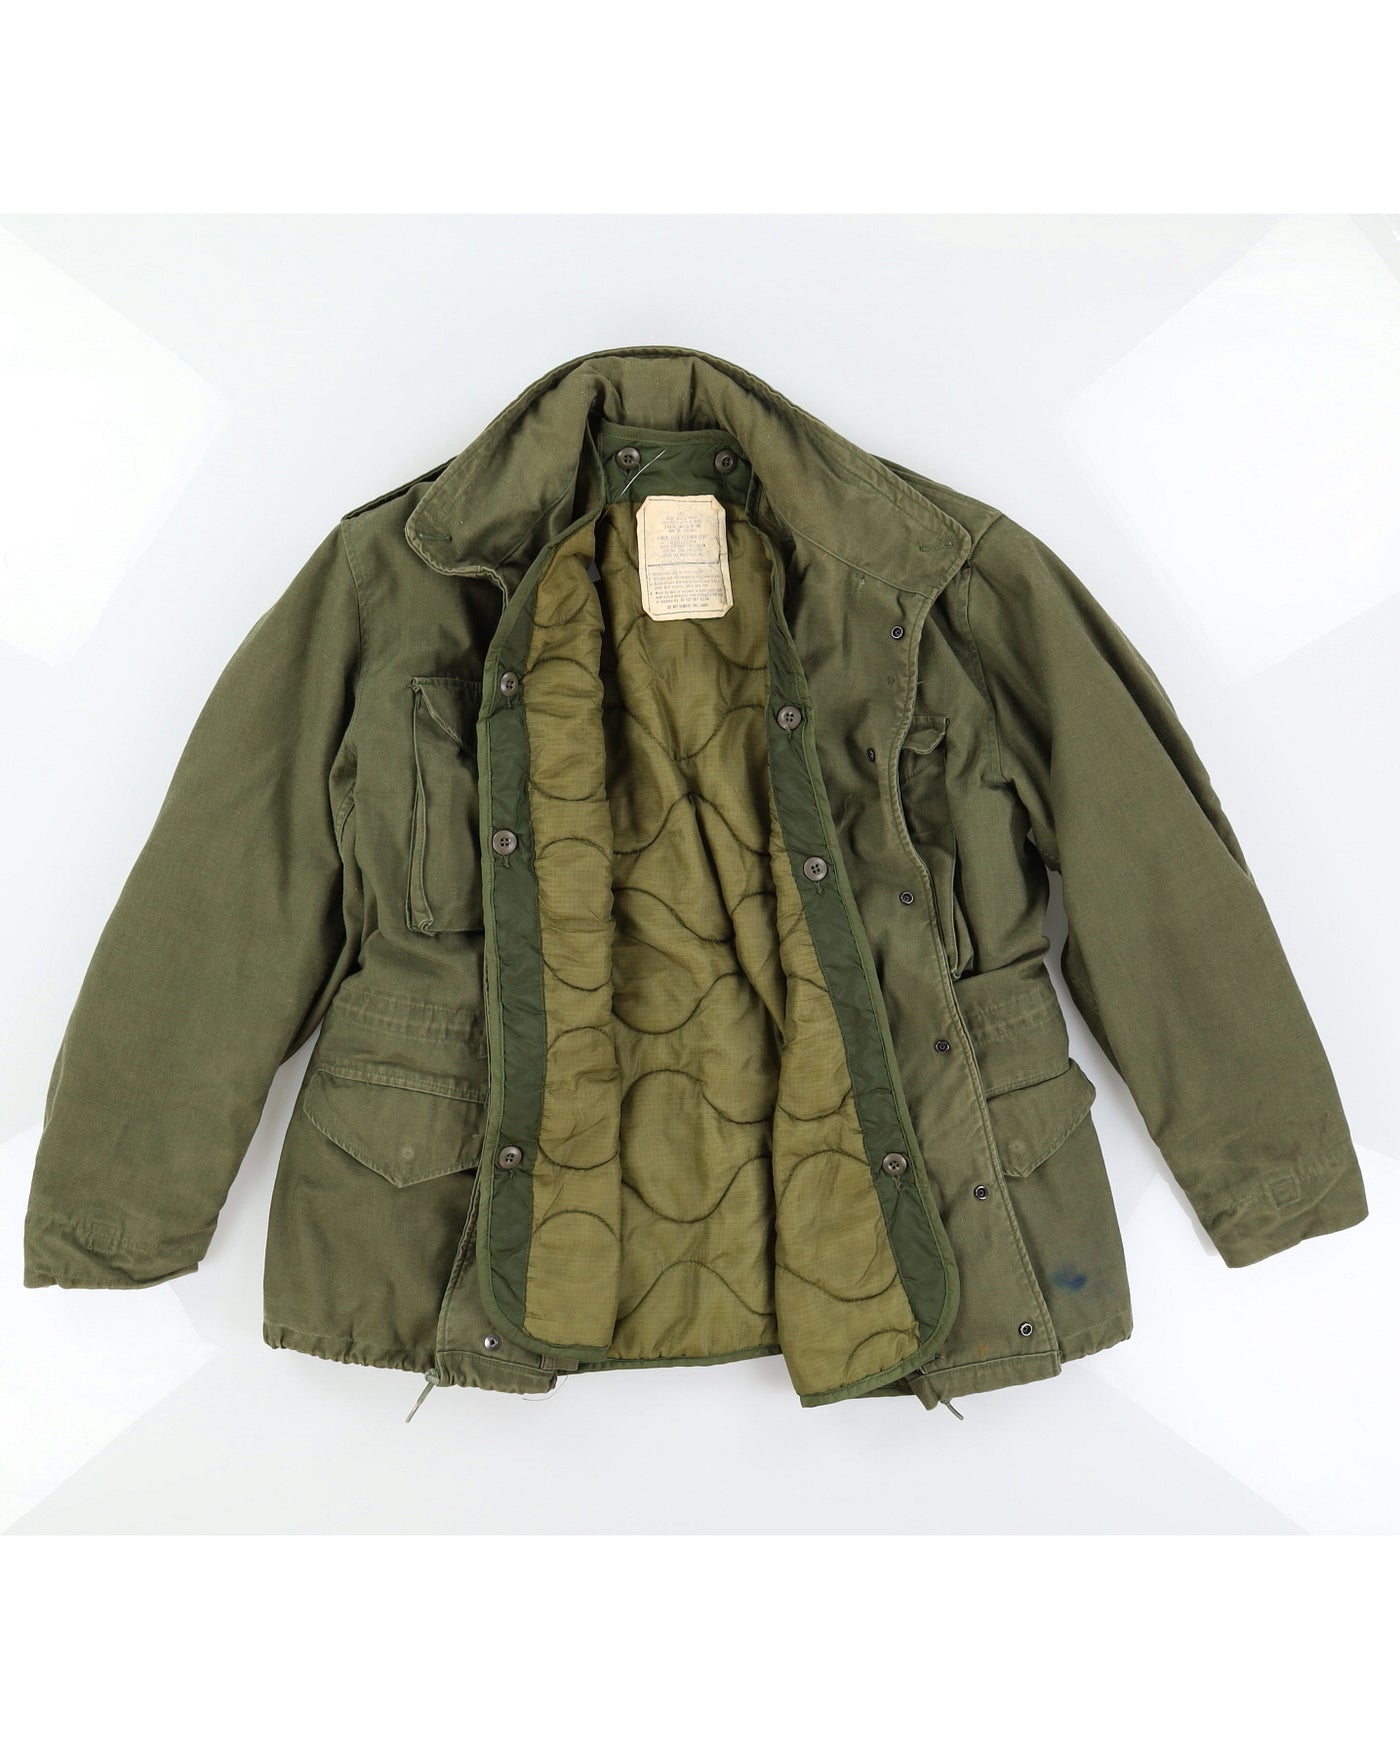 70s US Army M65 Field Jacket & Liner - L